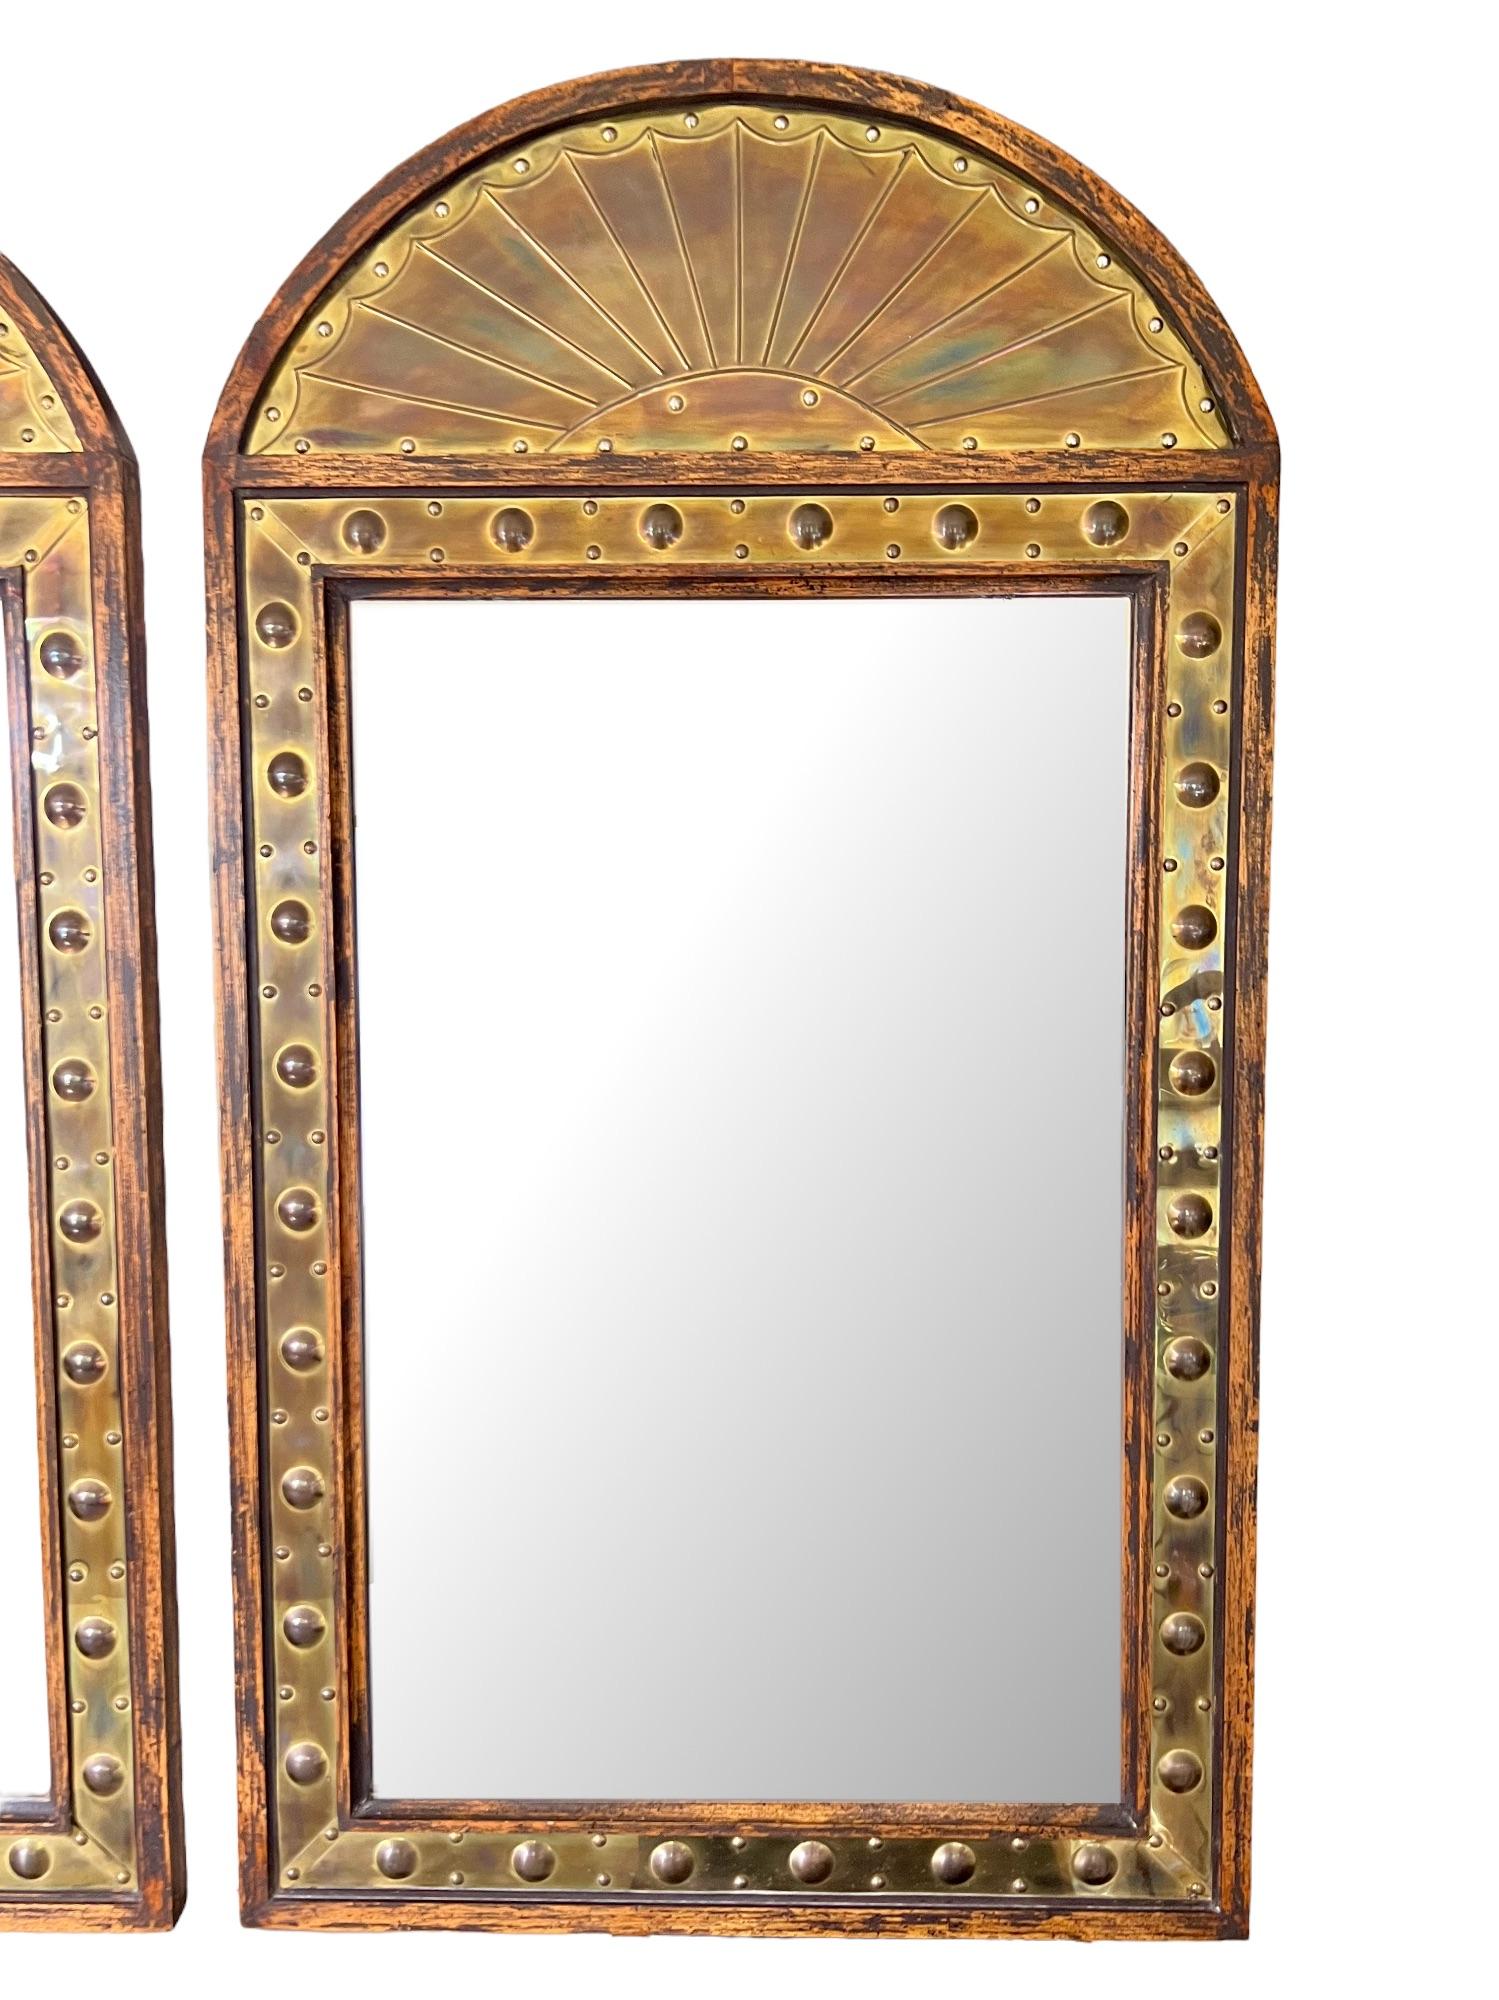 Late 20th Century Vintage Italian Sarreid Studded Brass Repoussé Arched Wall Mirrors, Pair